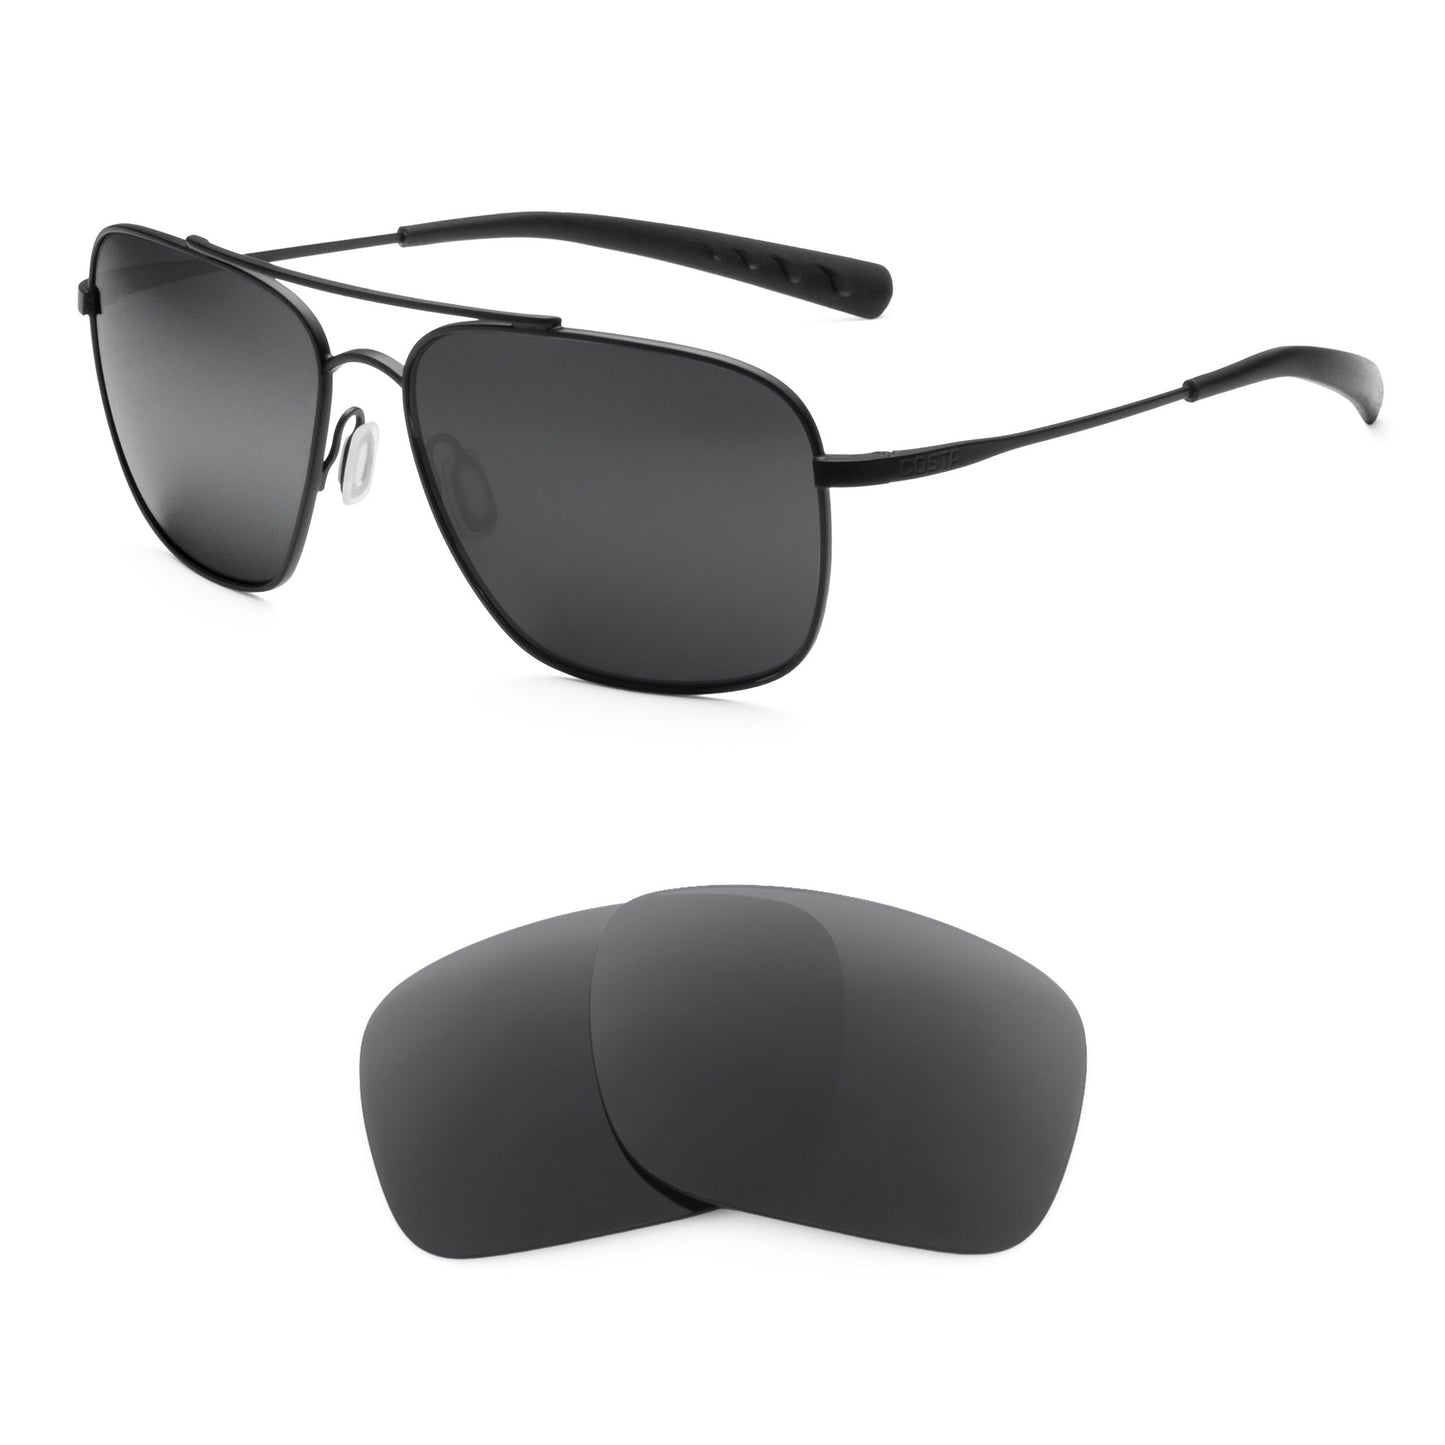 Costa Canaveral sunglasses with replacement lenses